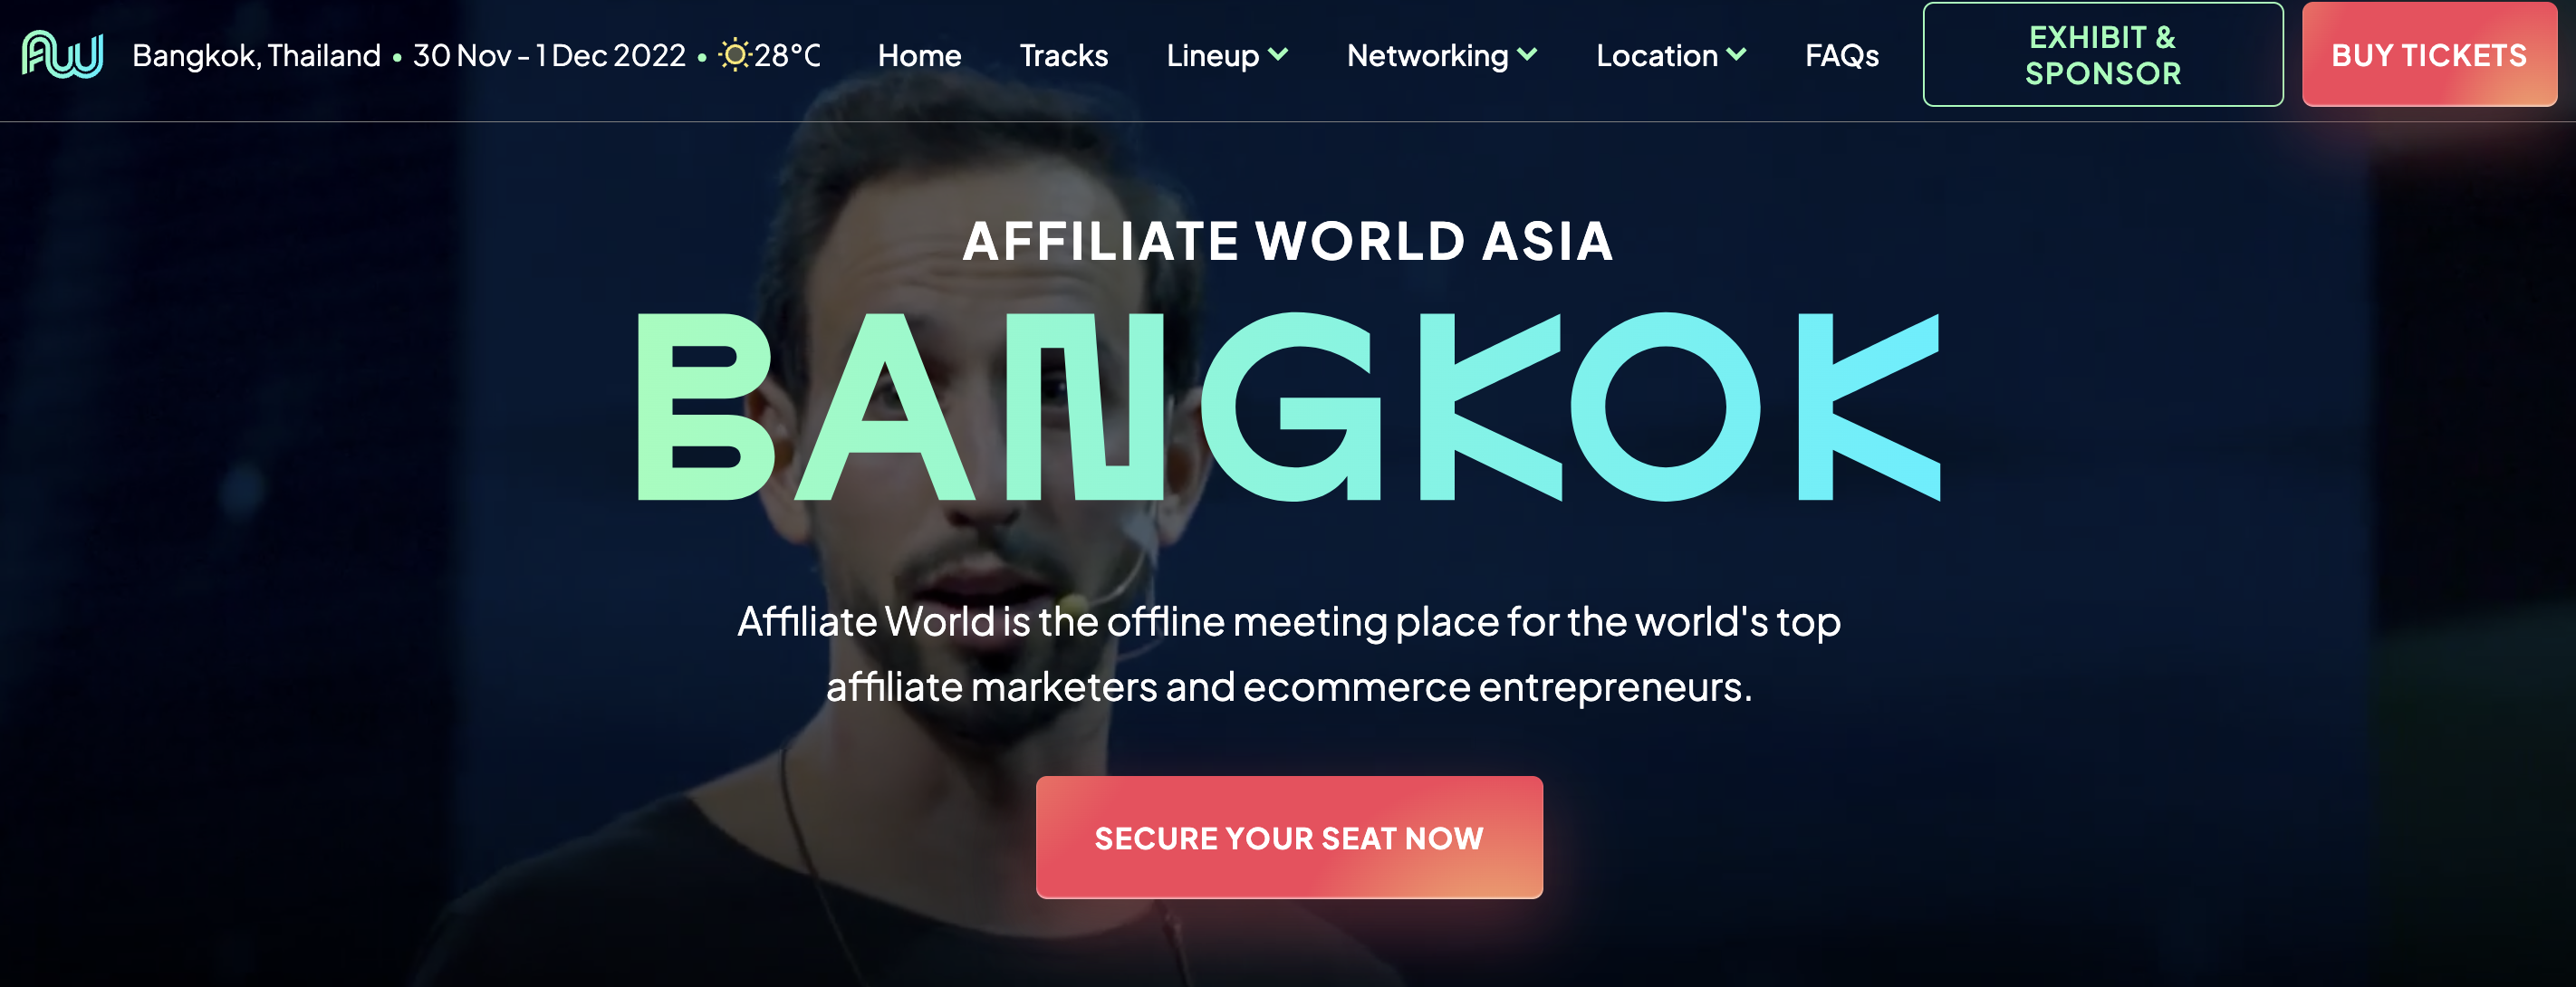 Affiliate World Asia Conference